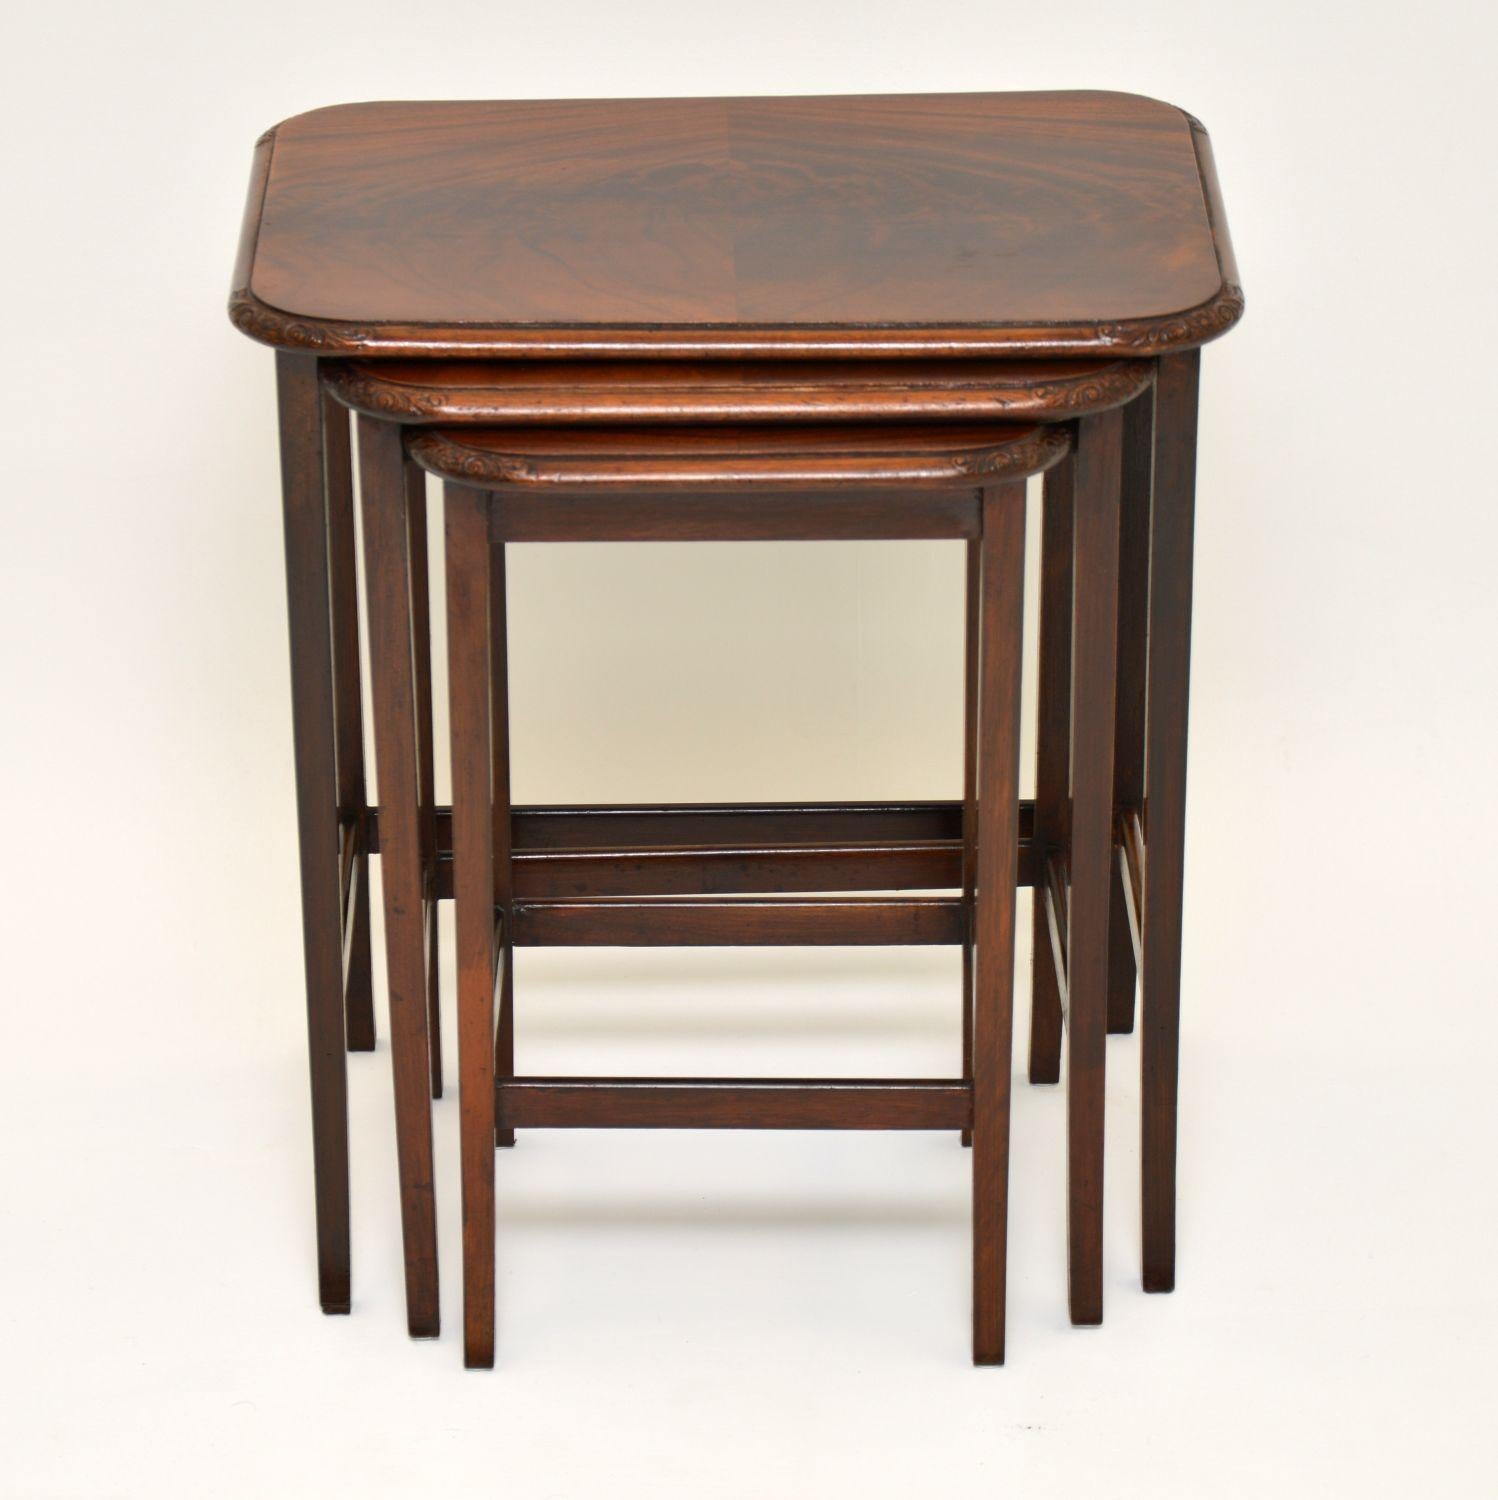 Small antique mahogany nest of tables with flame mahogany tops, all in good condition and dating from circa 1910 period. The top corners are carved and the legs have cross stretchers between which give them more stability.

Measures: Width 19